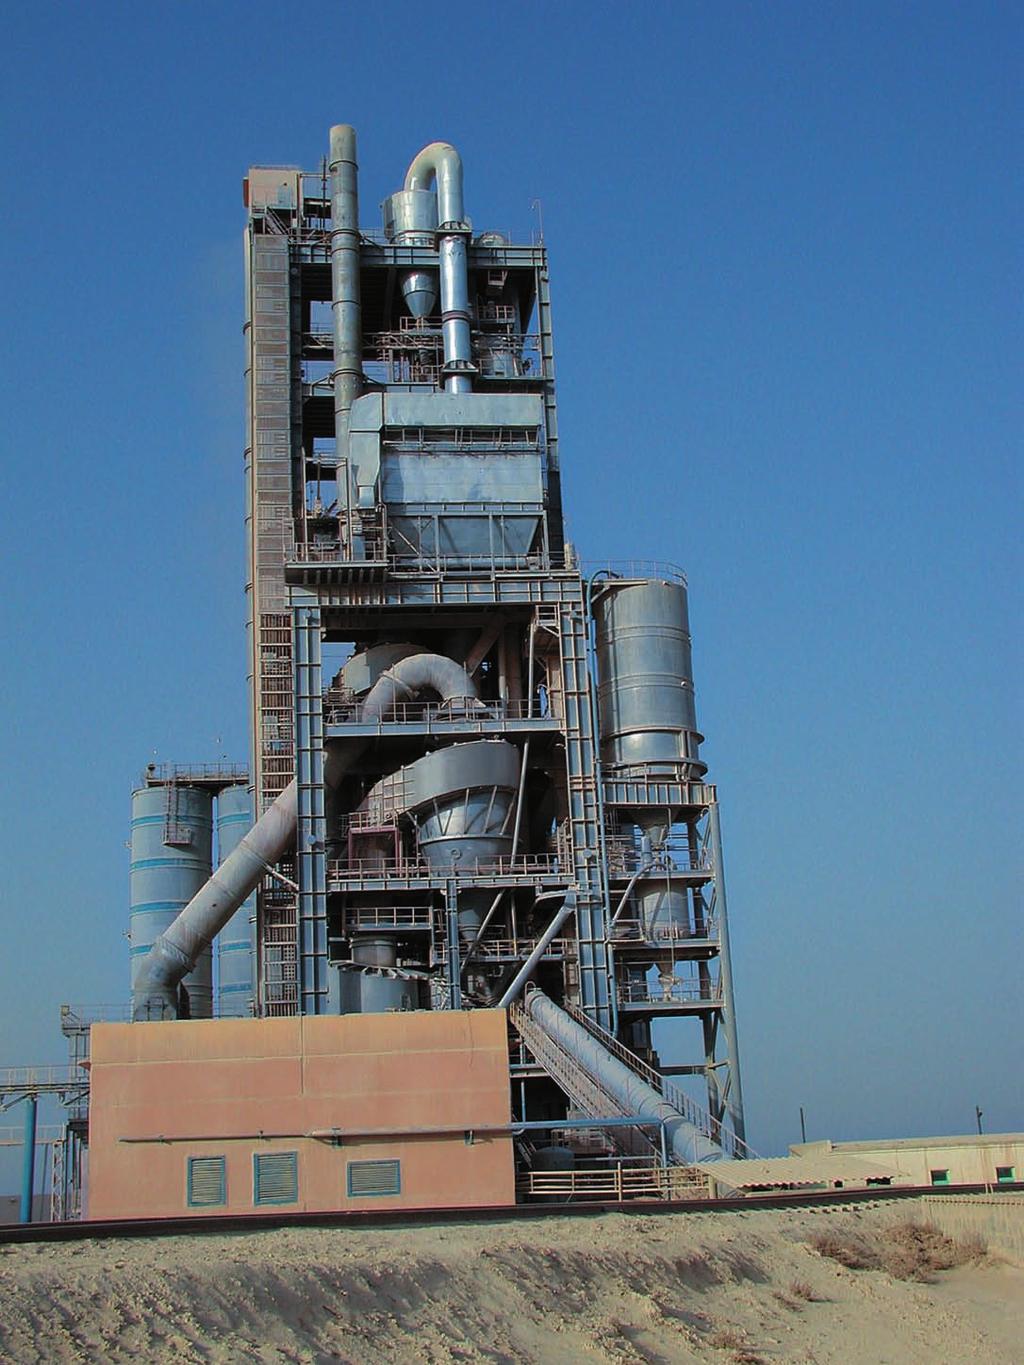 POLCAL systems have several vertically arranged cyclone stages and a reactor for thermal treatment of the raw materials as well as one or several cooling cyclones to cool the treated product.